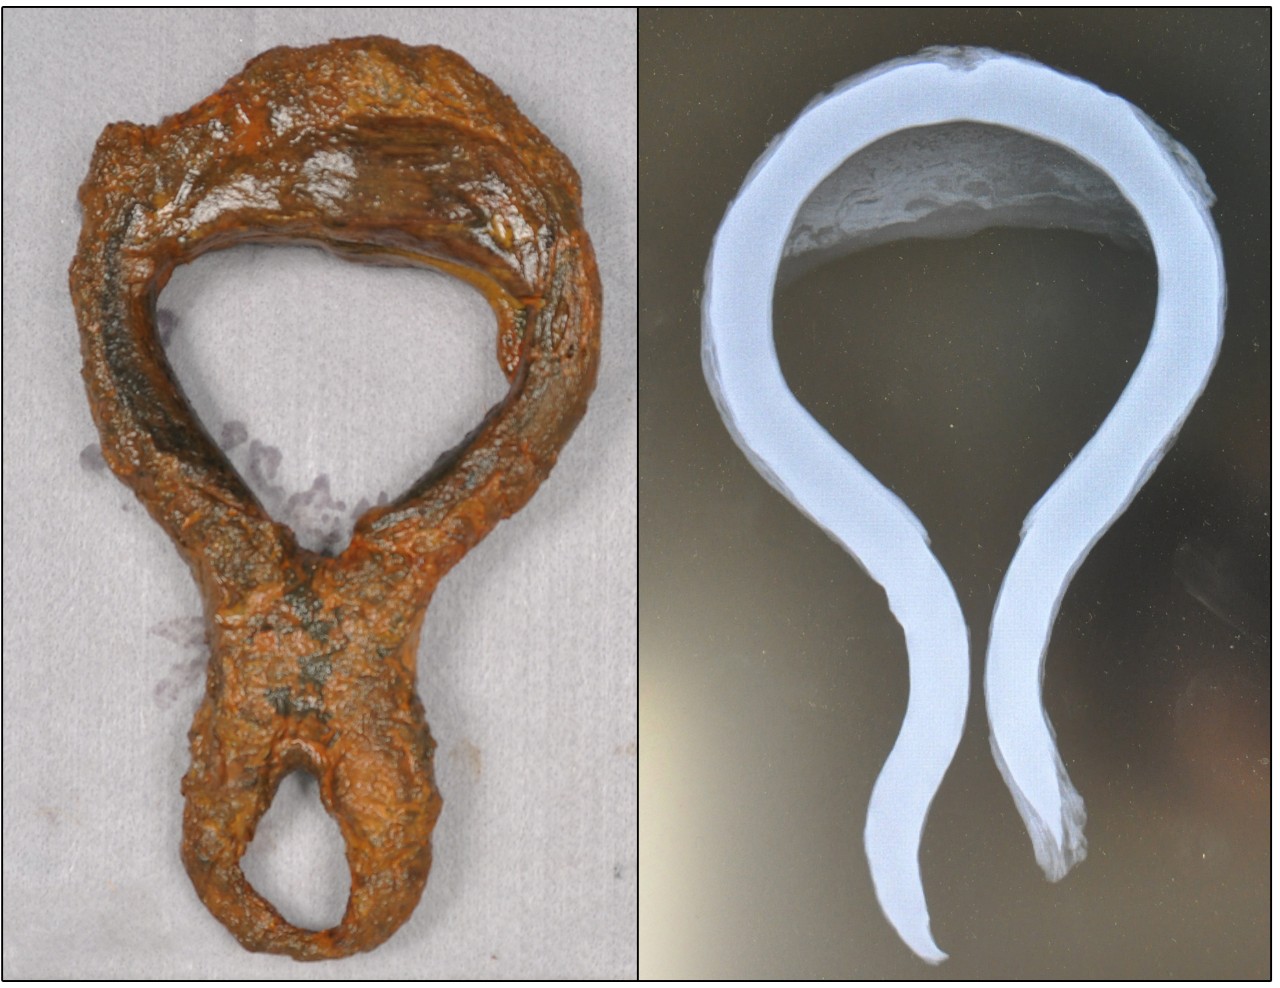 On the left is a color photograph of a partial wooden deadeye attached to a heavily concreted iron strop. On the right is an x-ray of the same deadeye and strop, showing the outline of the iron strop in bold white.